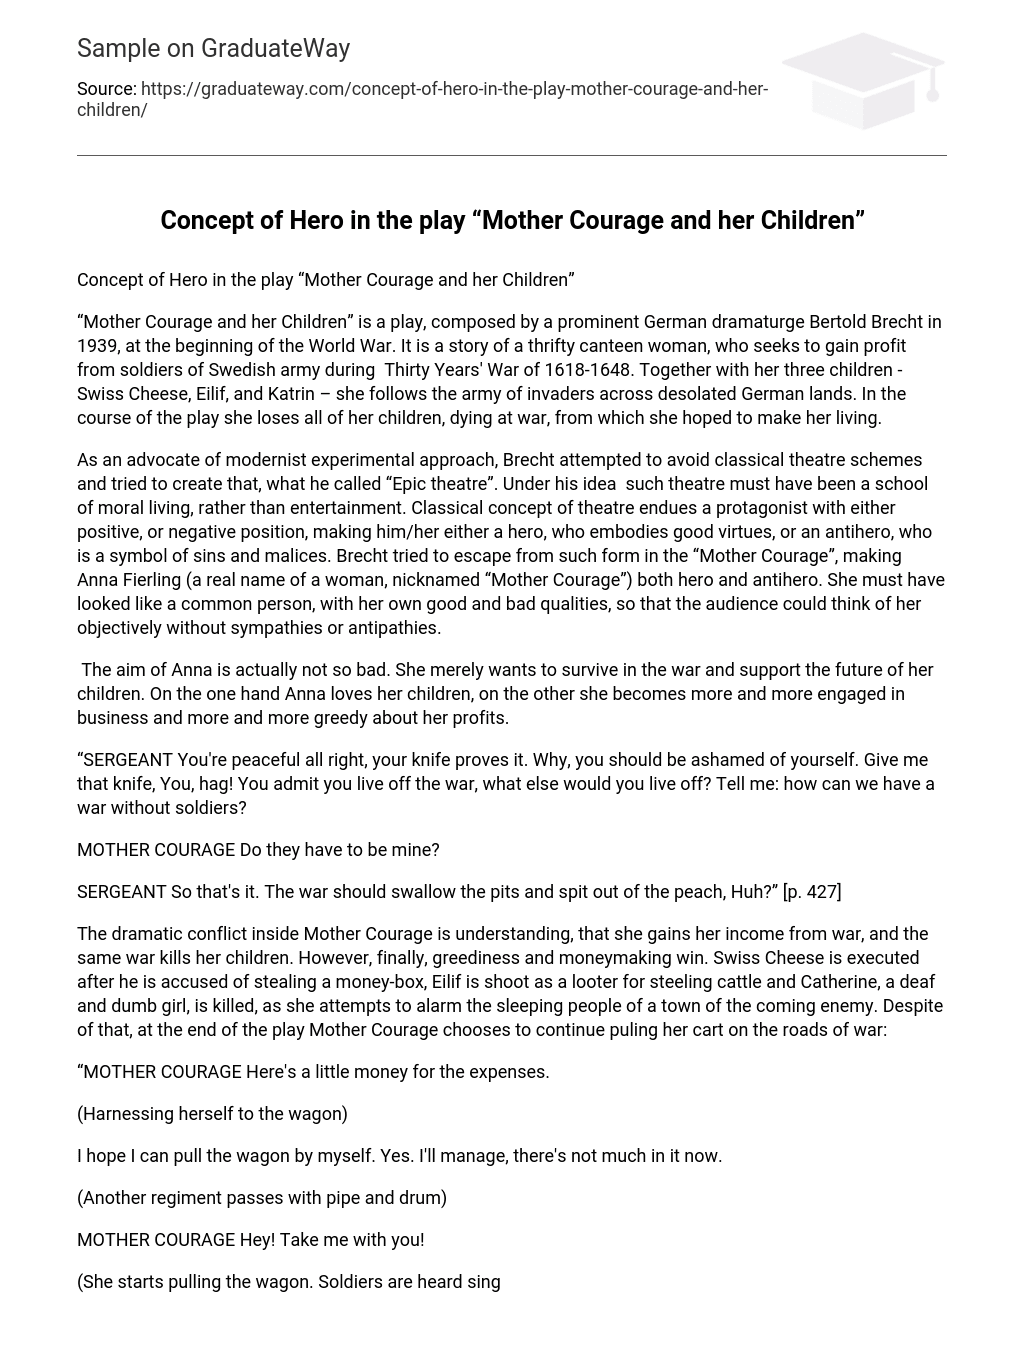 Concept of Hero in the play “Mother Courage and her Children” Character Analysis